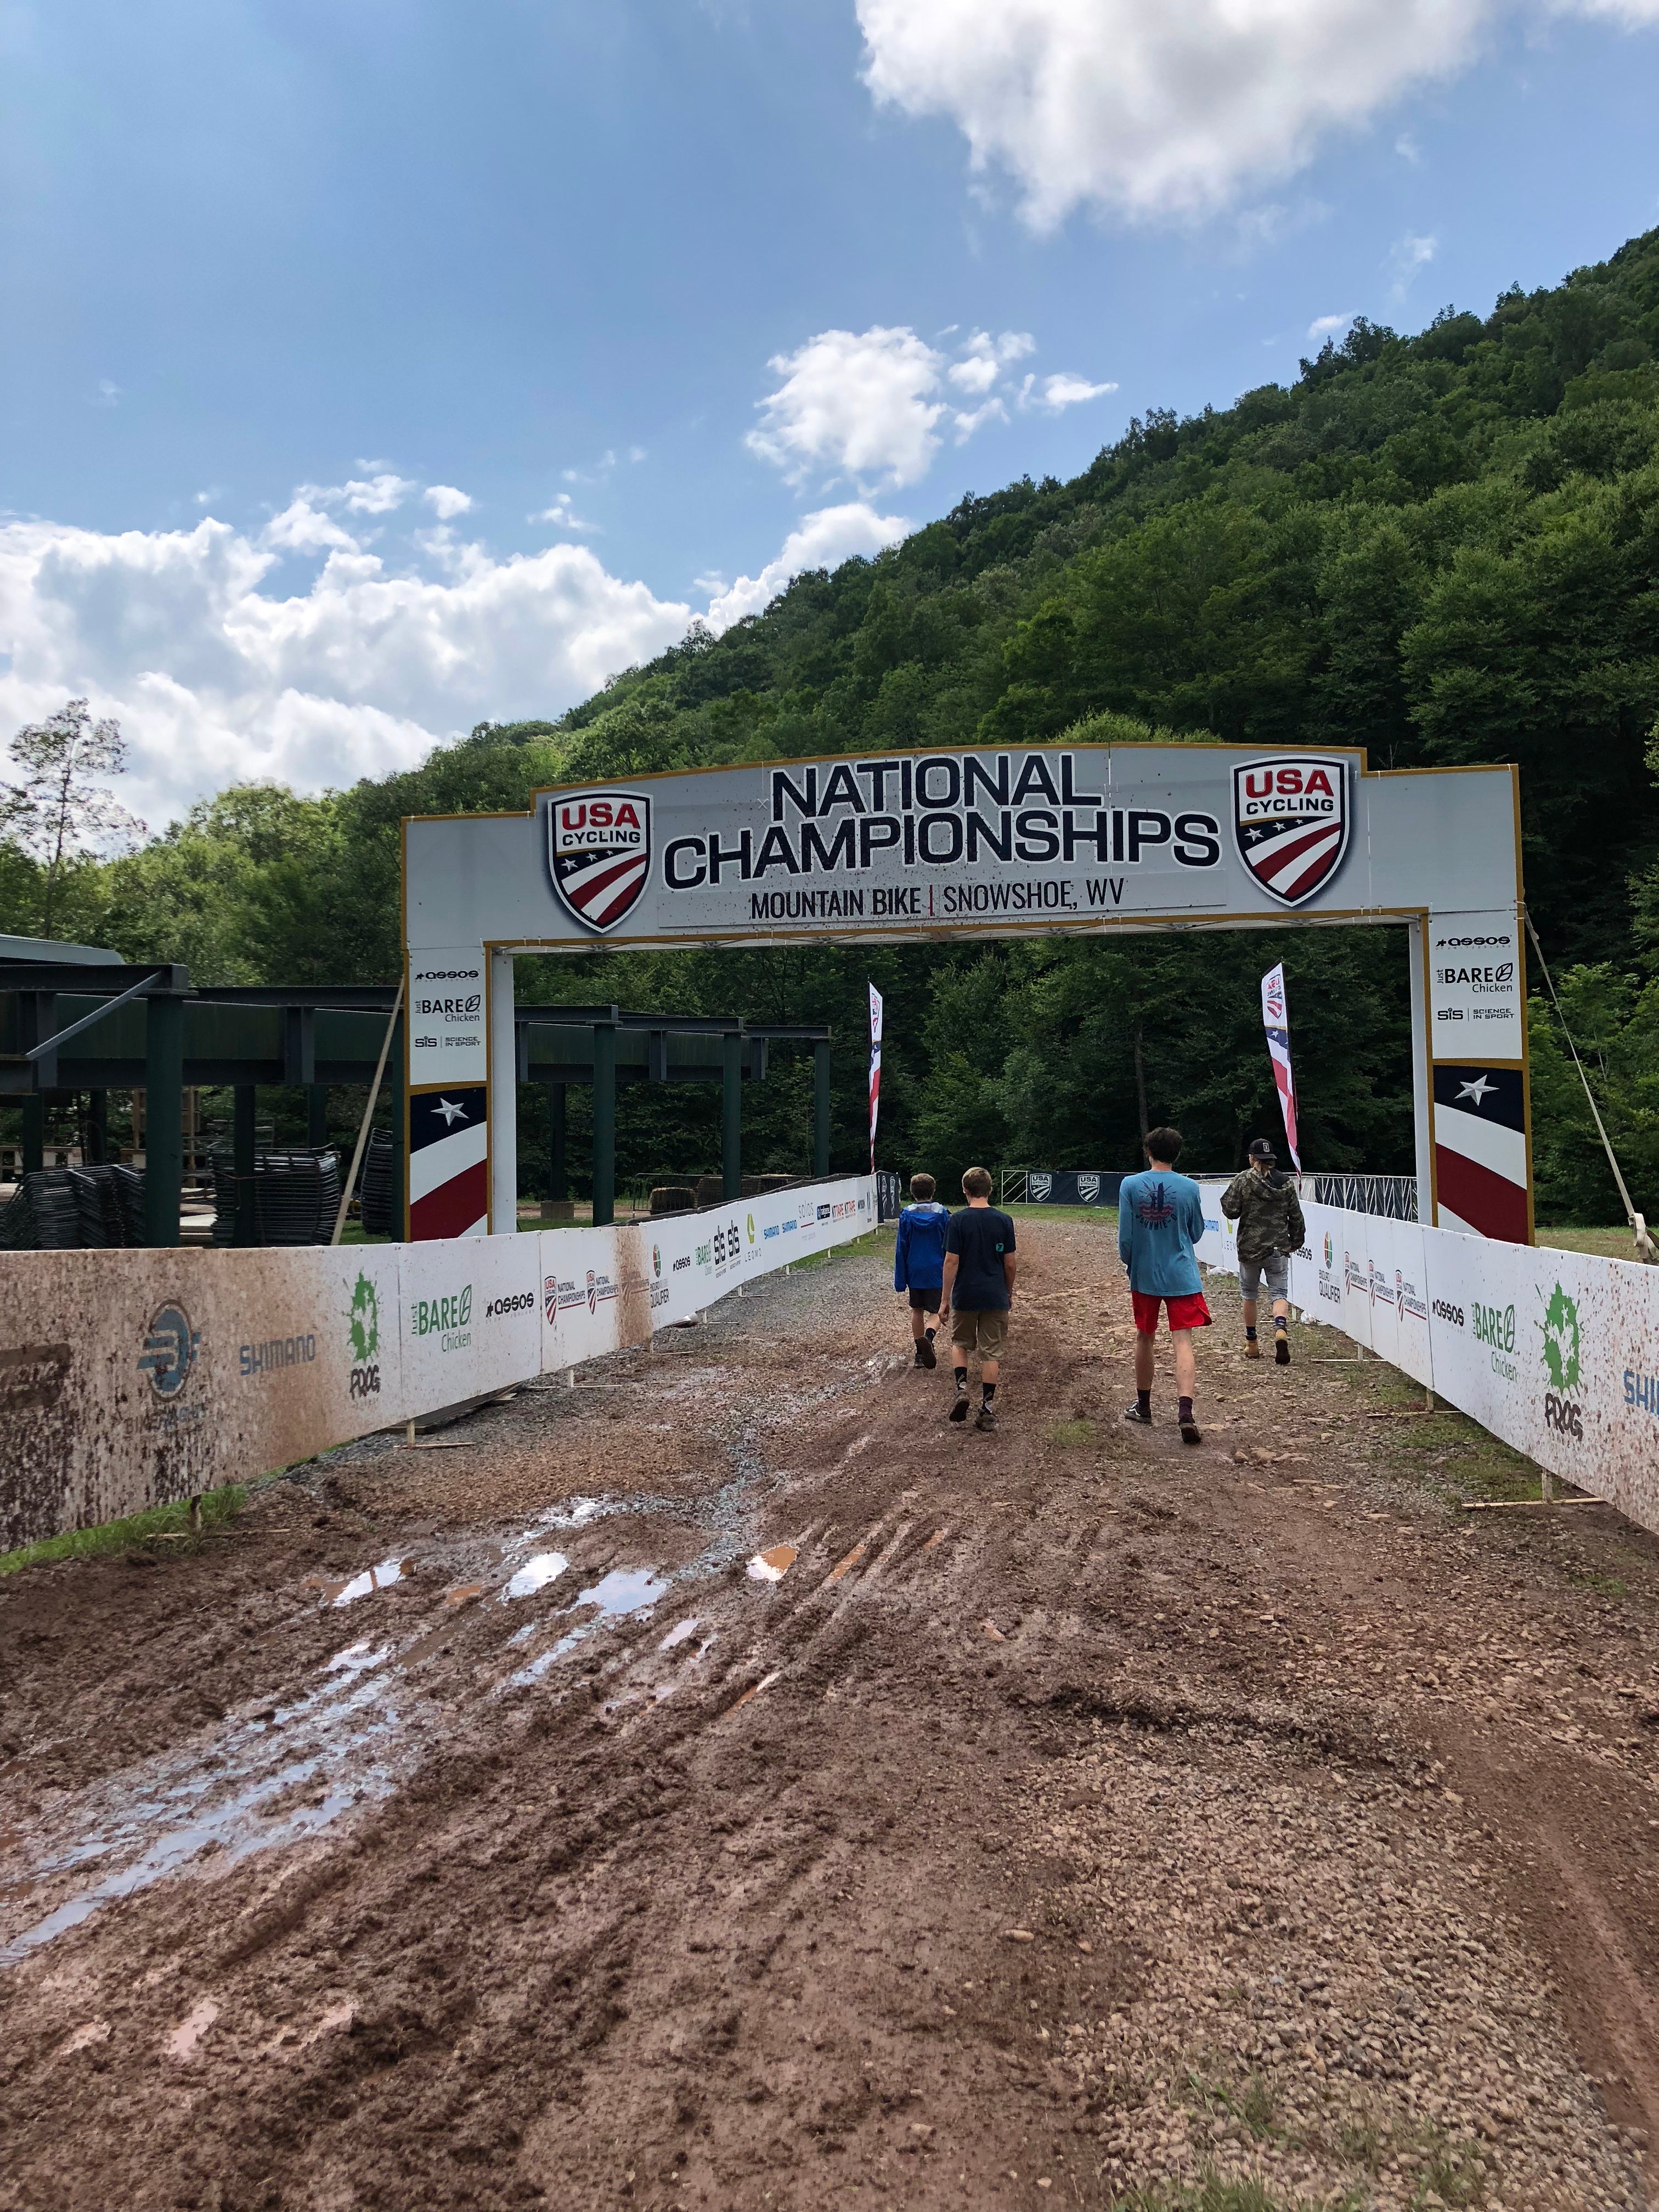 USAC National Championships in Snowshoe, West Virginia